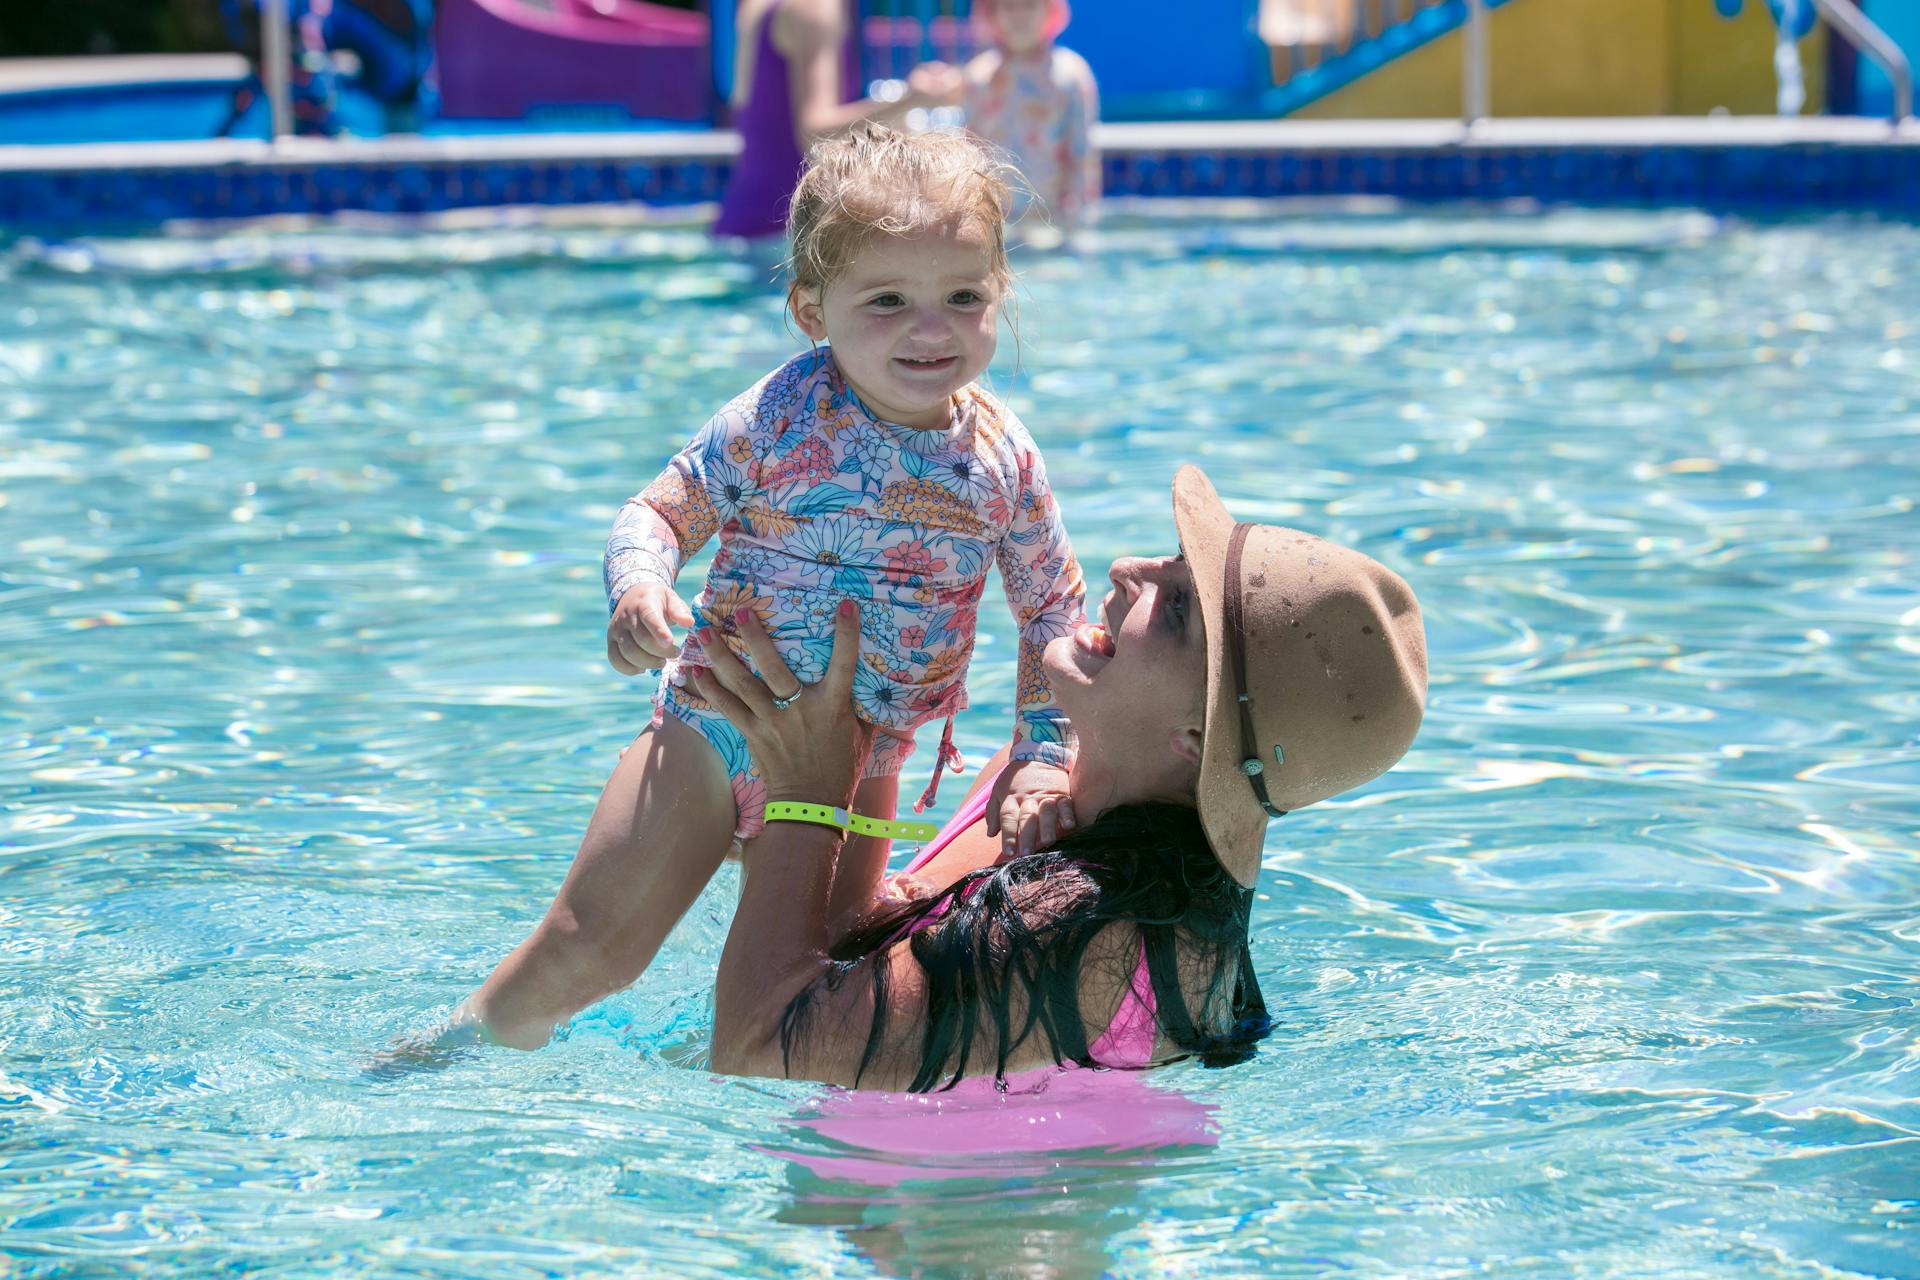 Summer swim safety tips for families